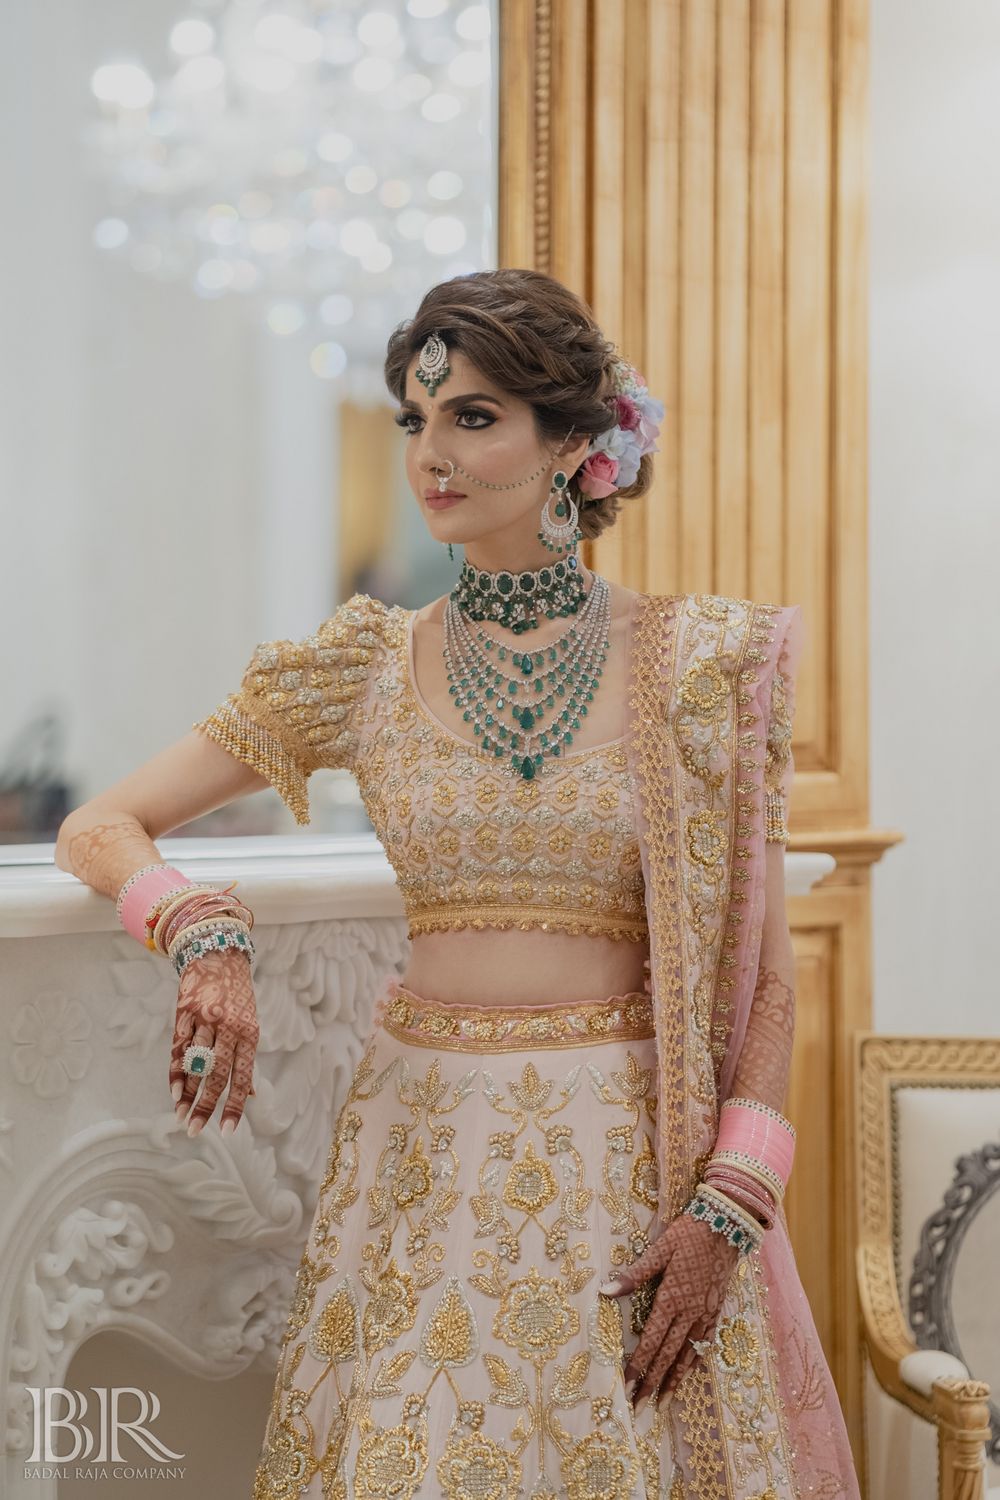 Photo of bride in unique lehenga by abu jani and green jewellery